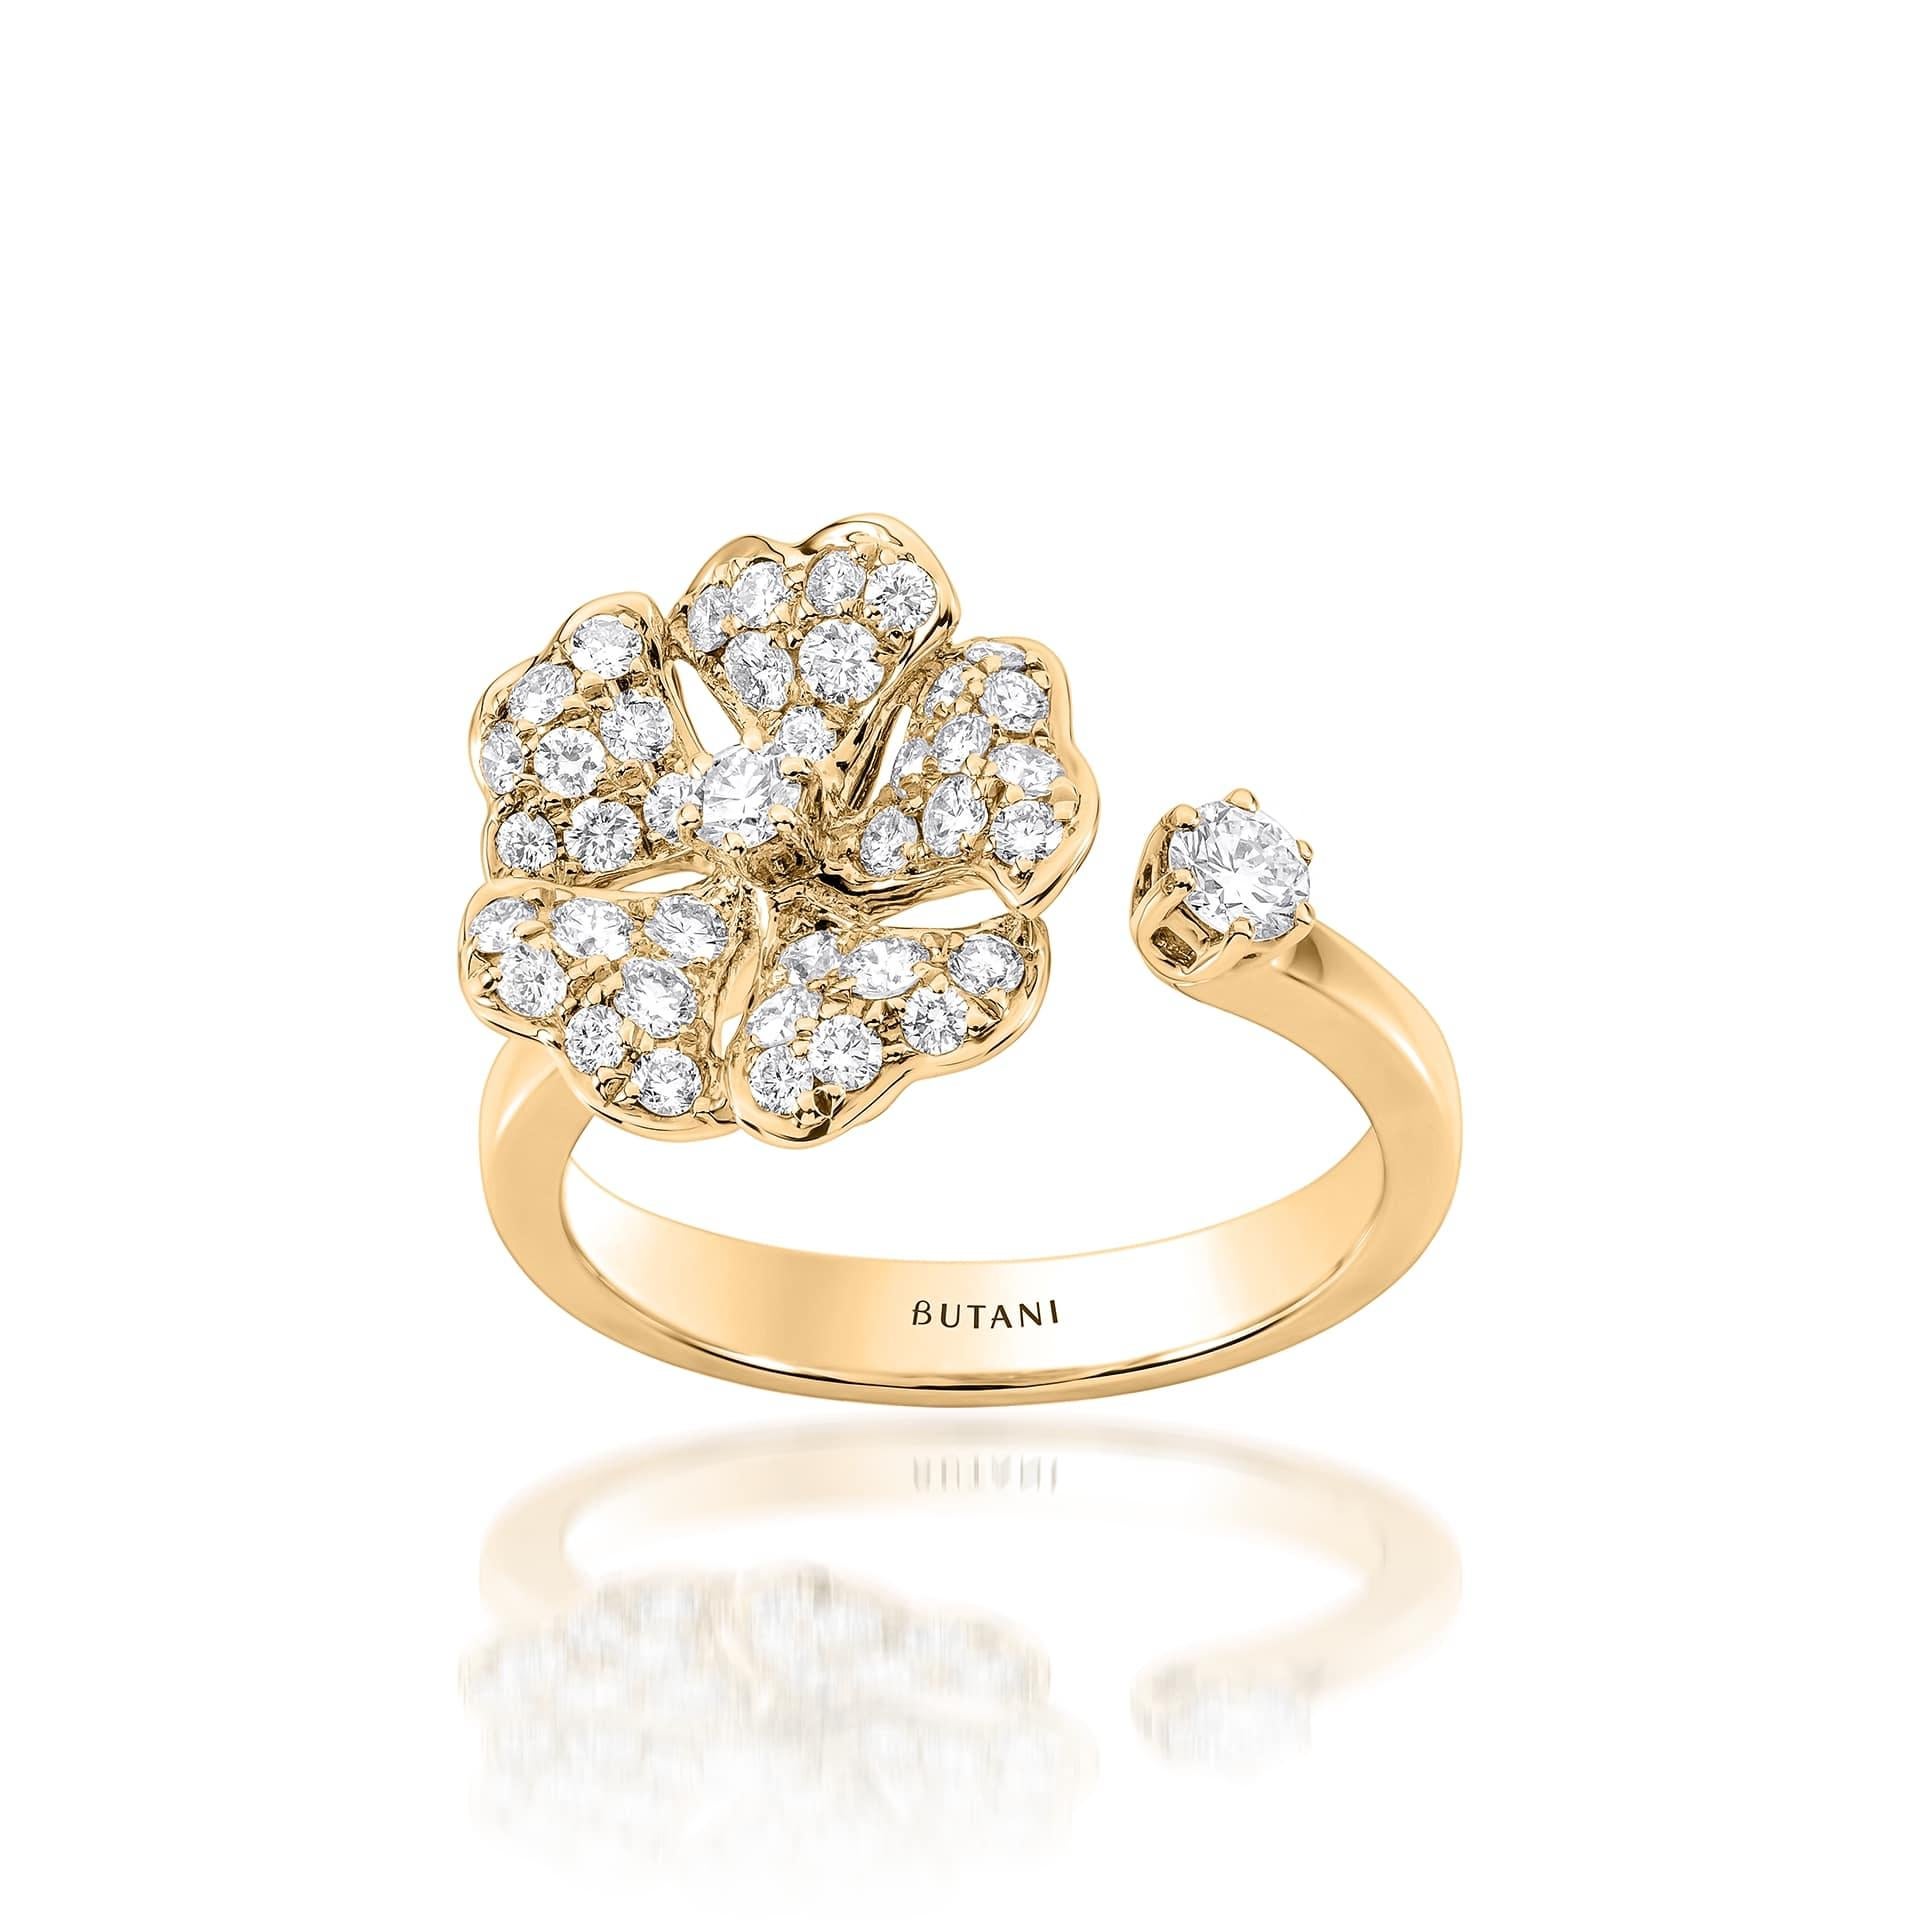 Bloom Gold and Pavé Diamond Open Ring in 18K Yellow Gold

Inspired by the exquisite petals of the alpine cinquefoil flower, the Bloom collection combines the richness of diamonds and precious metals with the light versatility of this delicate,